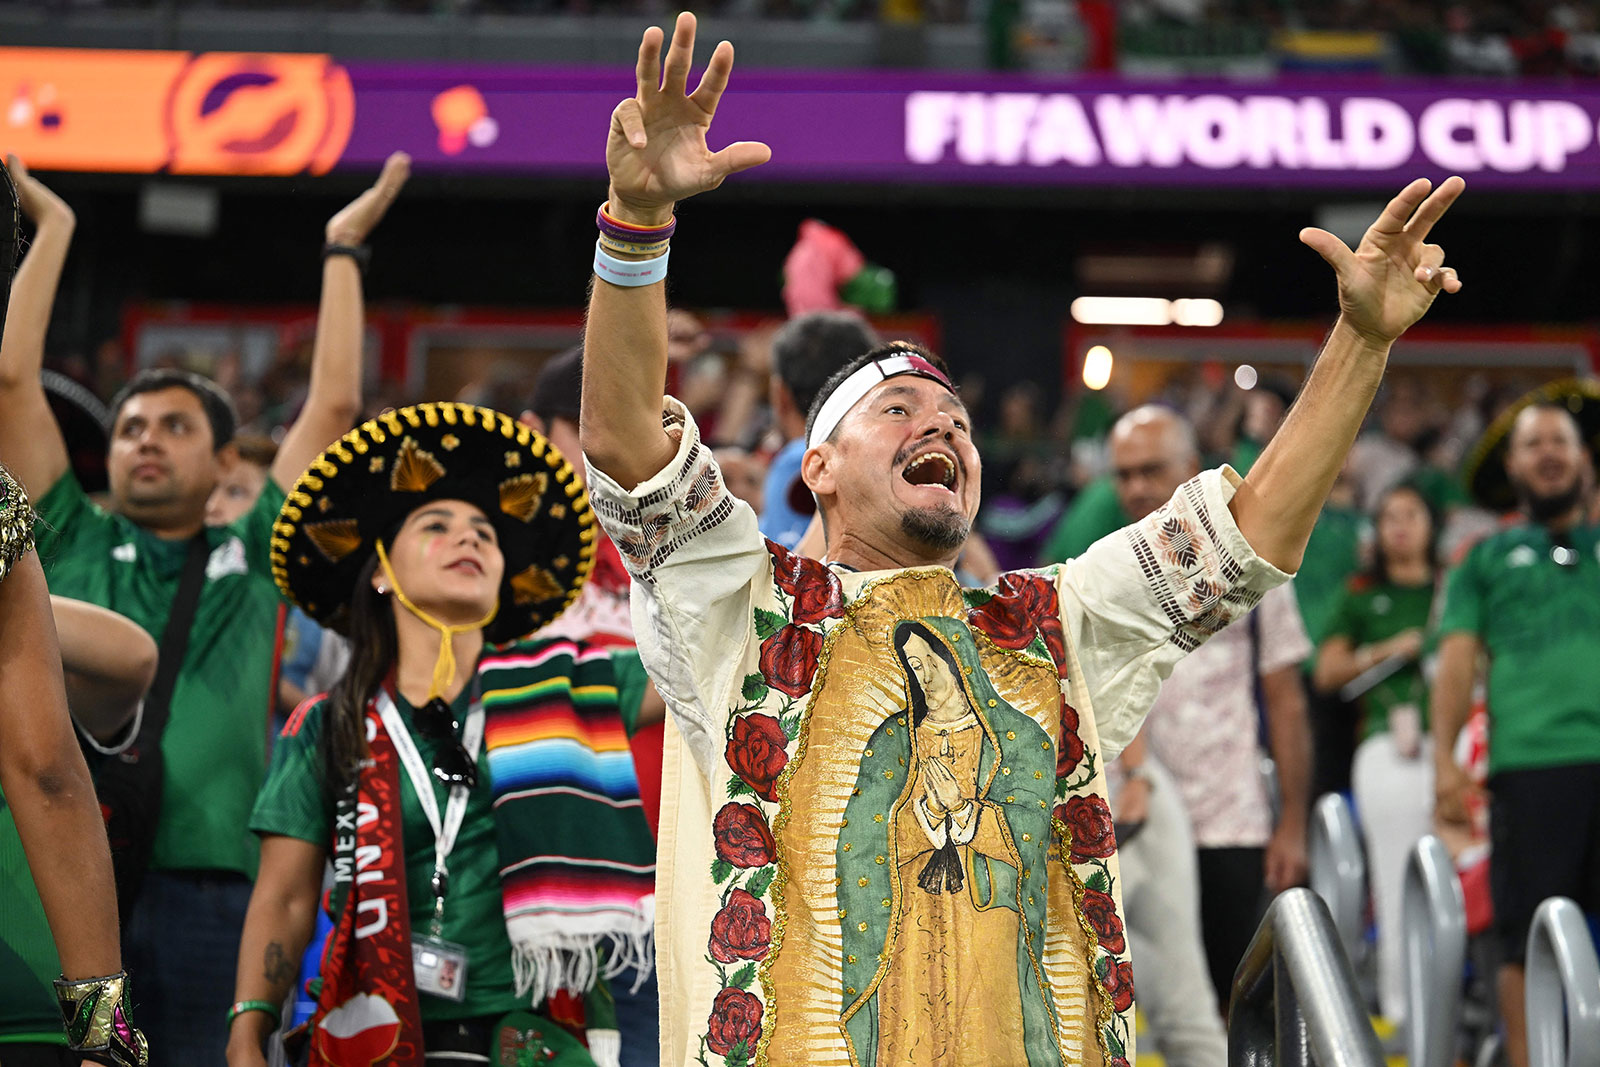 Fans of Mexico cheer in the stands ahead of match between Mexico and Poland on November 22.